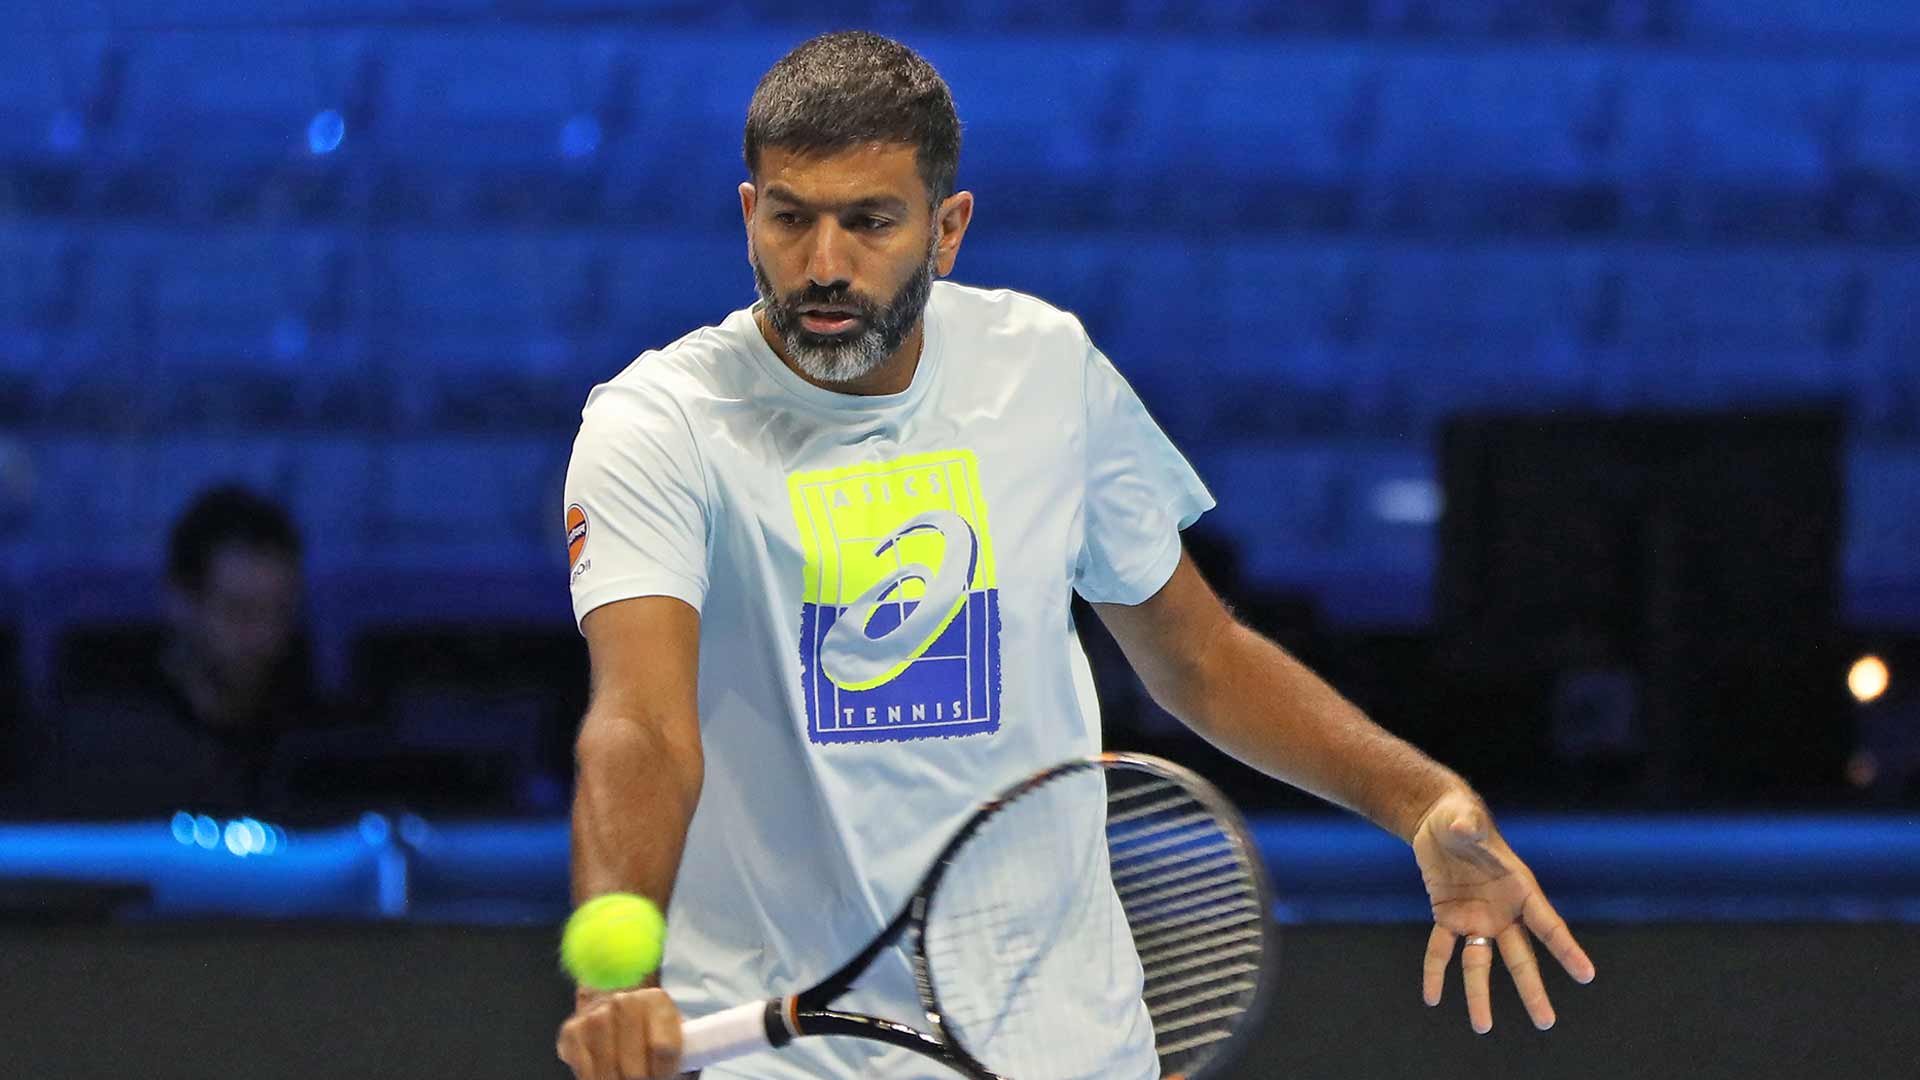 Rohan Bopanna is competing at his fourth Nitto ATP Finals, but his first in Turin.